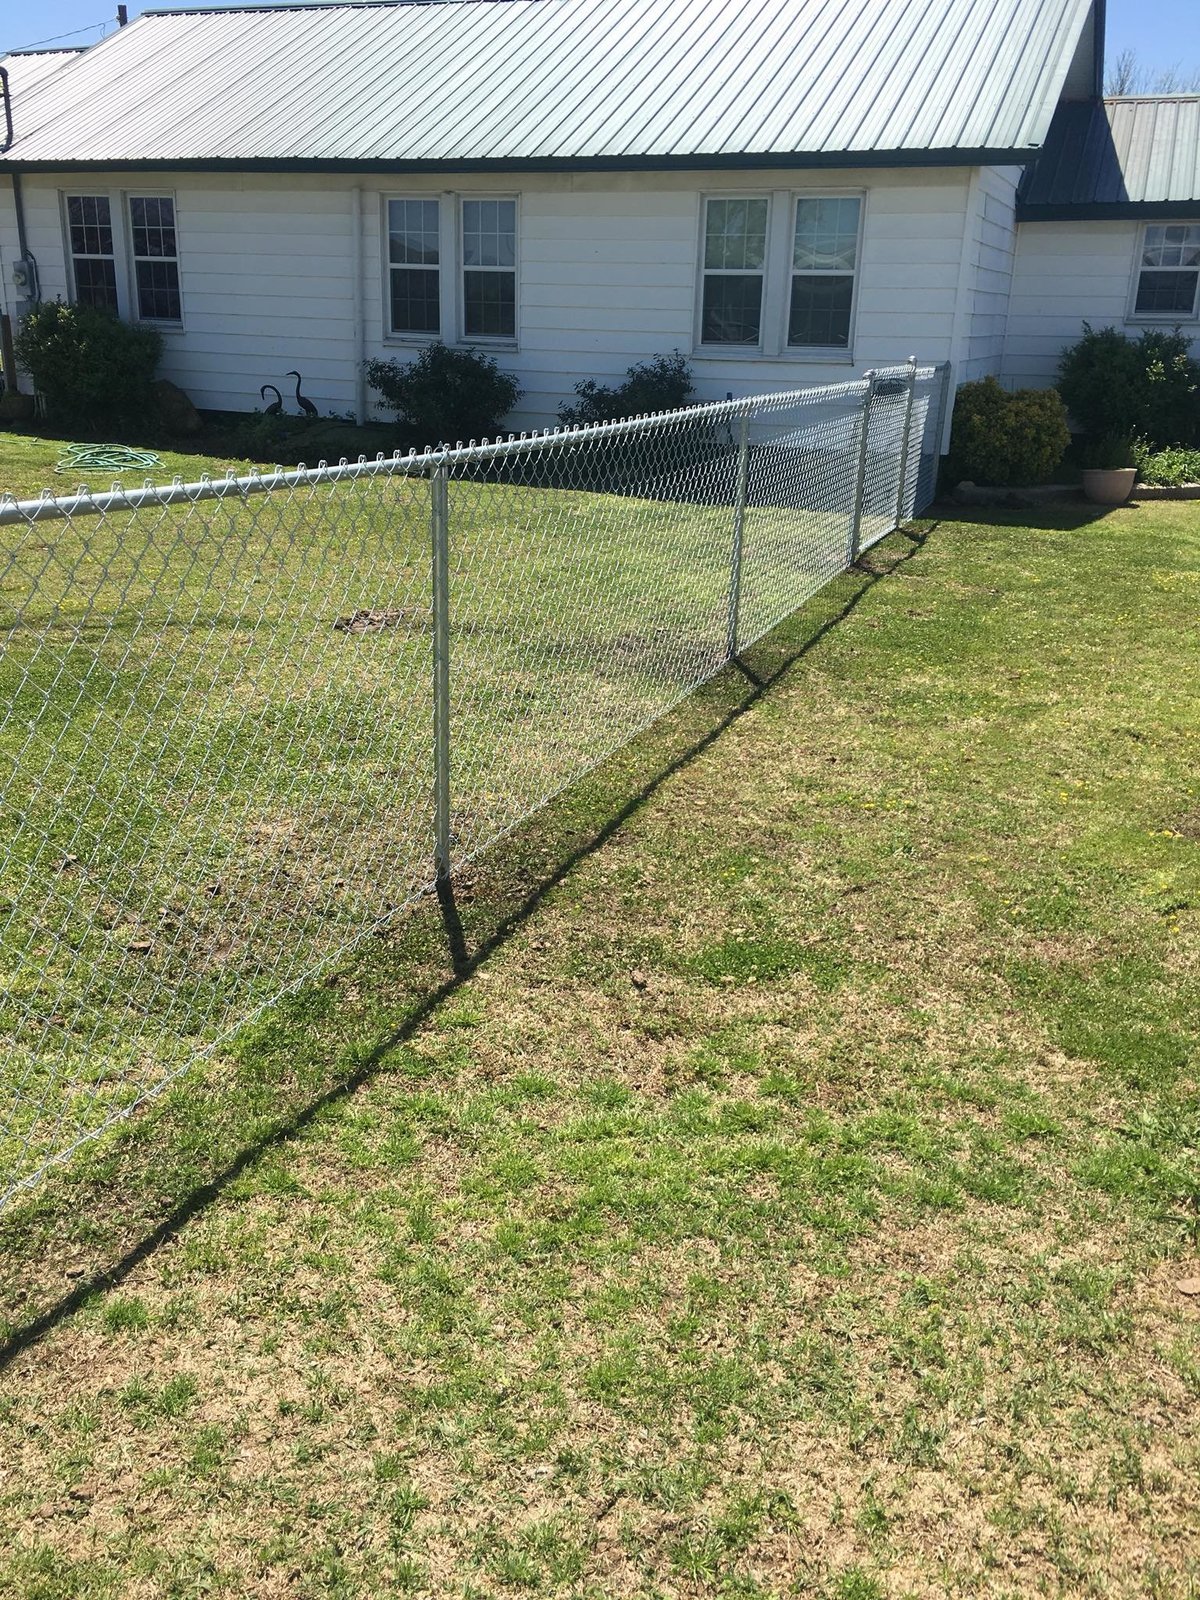 Residential Chain Link Fence Seminole